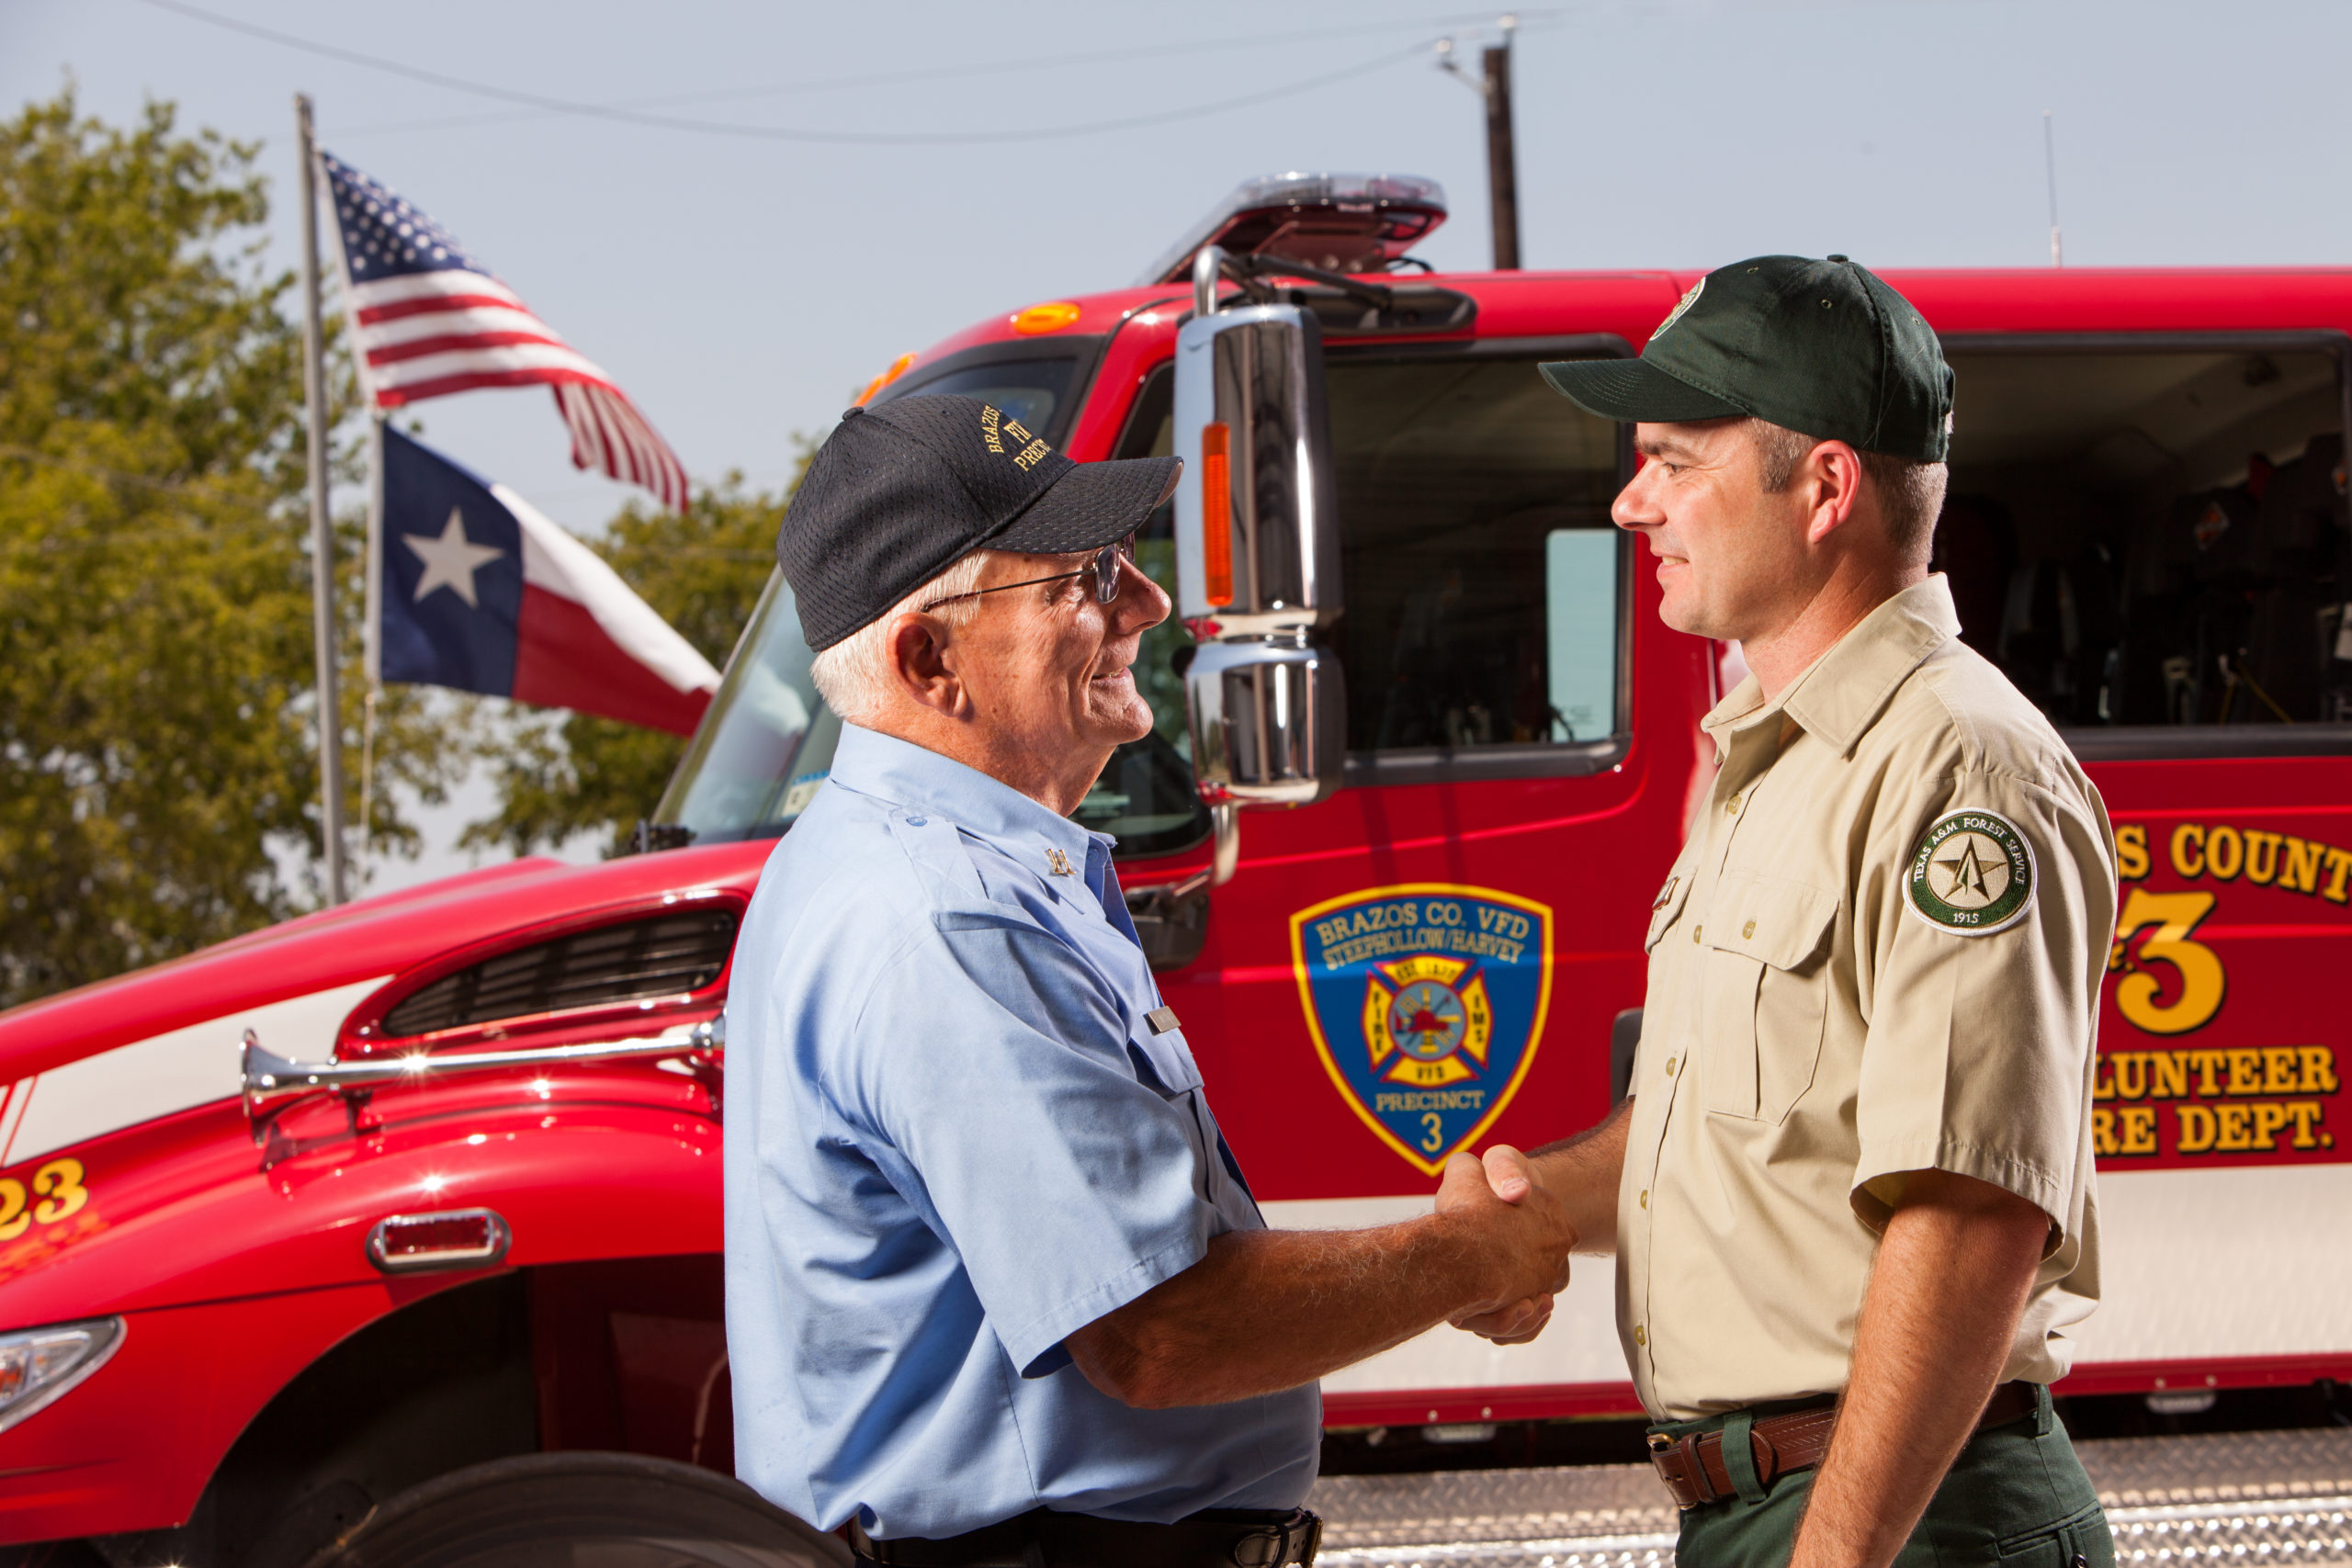 Two men are shaking hands in front of a firetruck